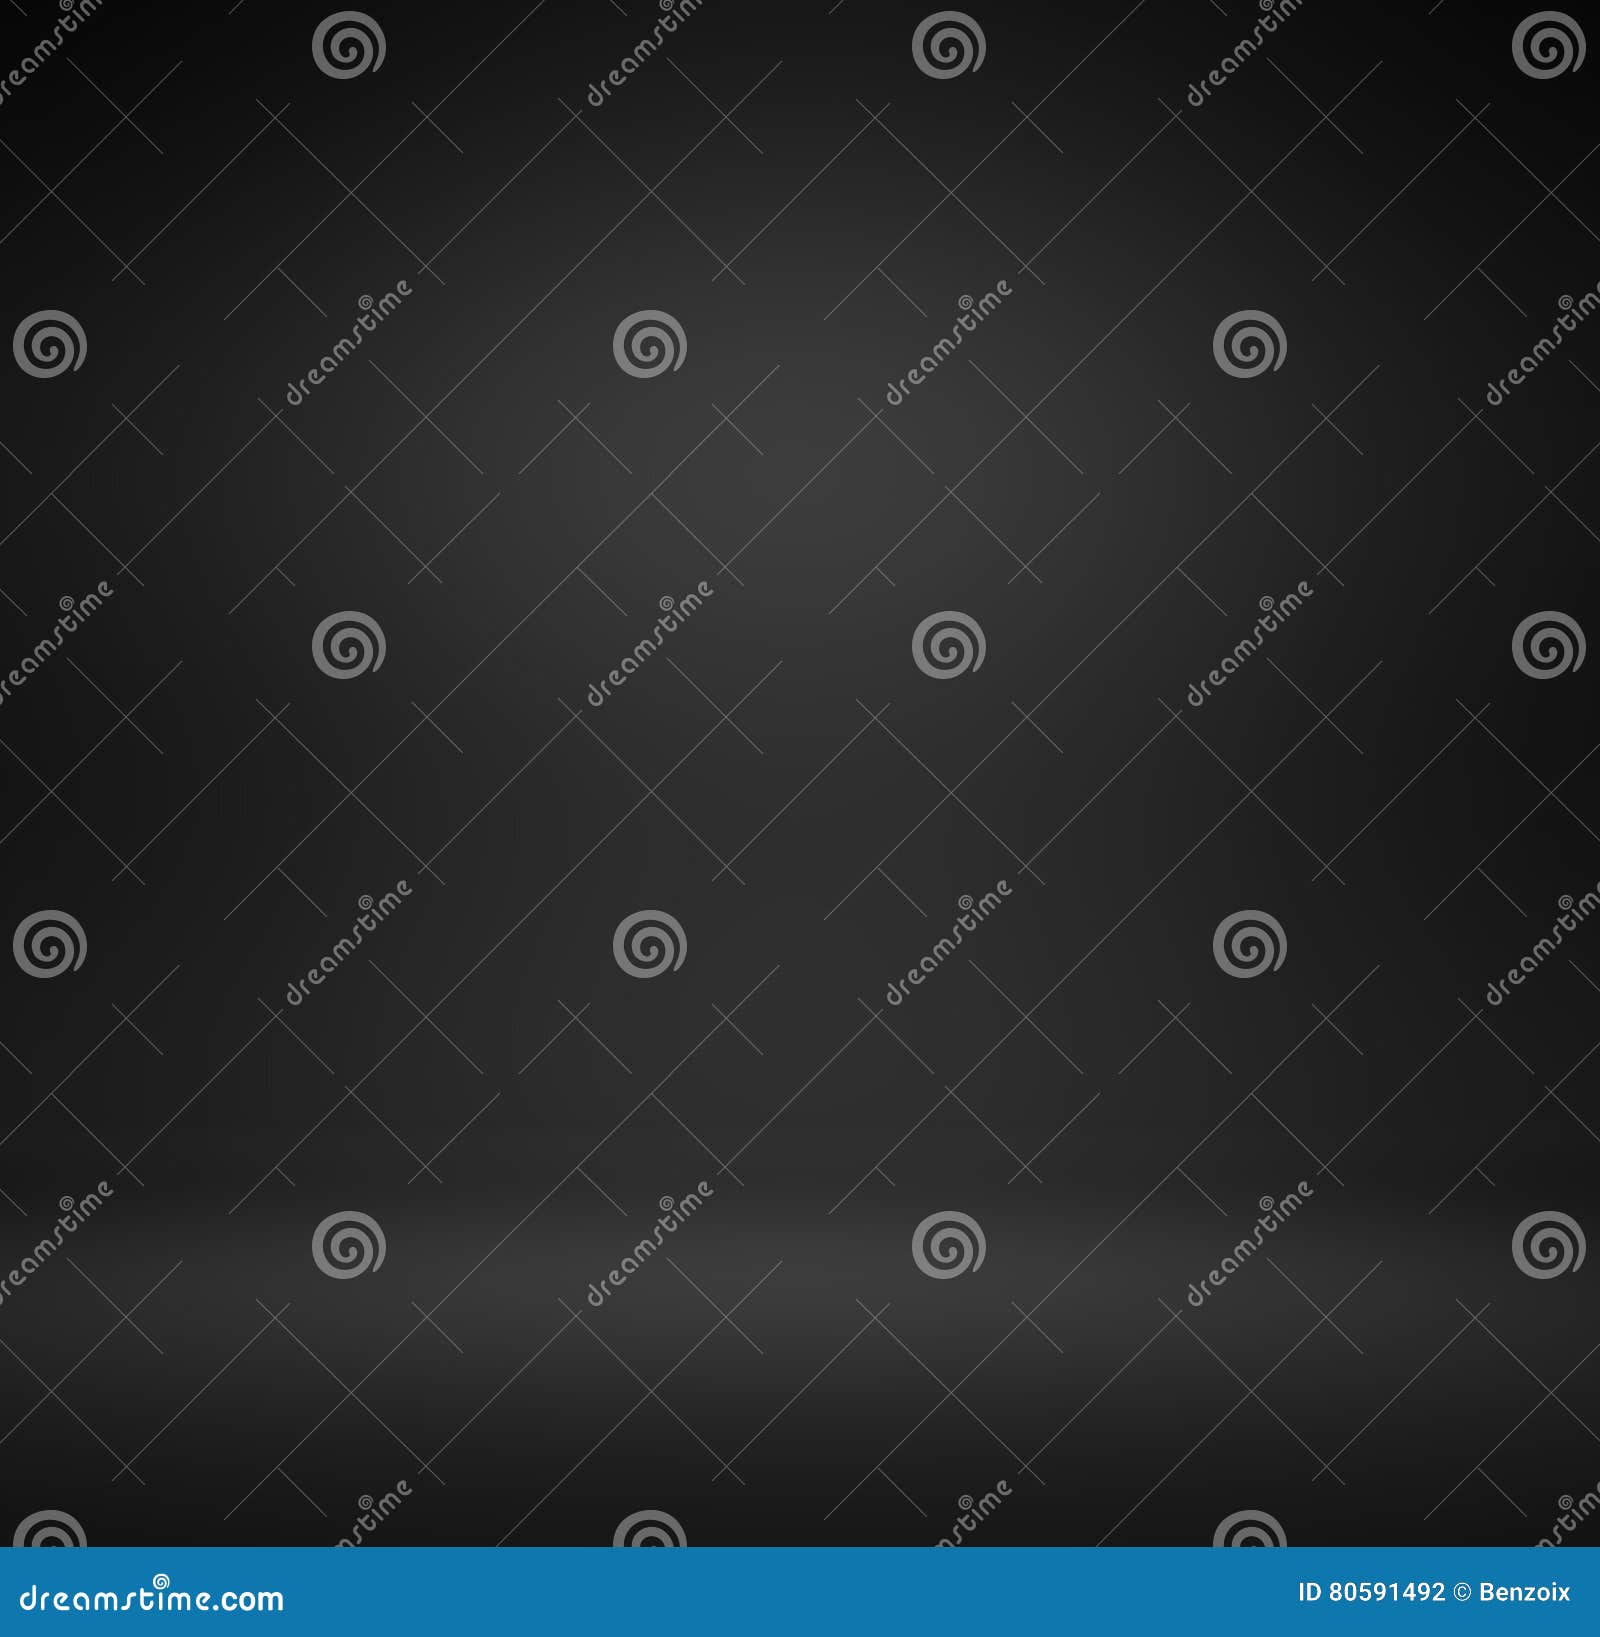 abstract luxury black gradient with border black vignette background studio backdrop - well use as back drop background, black bo